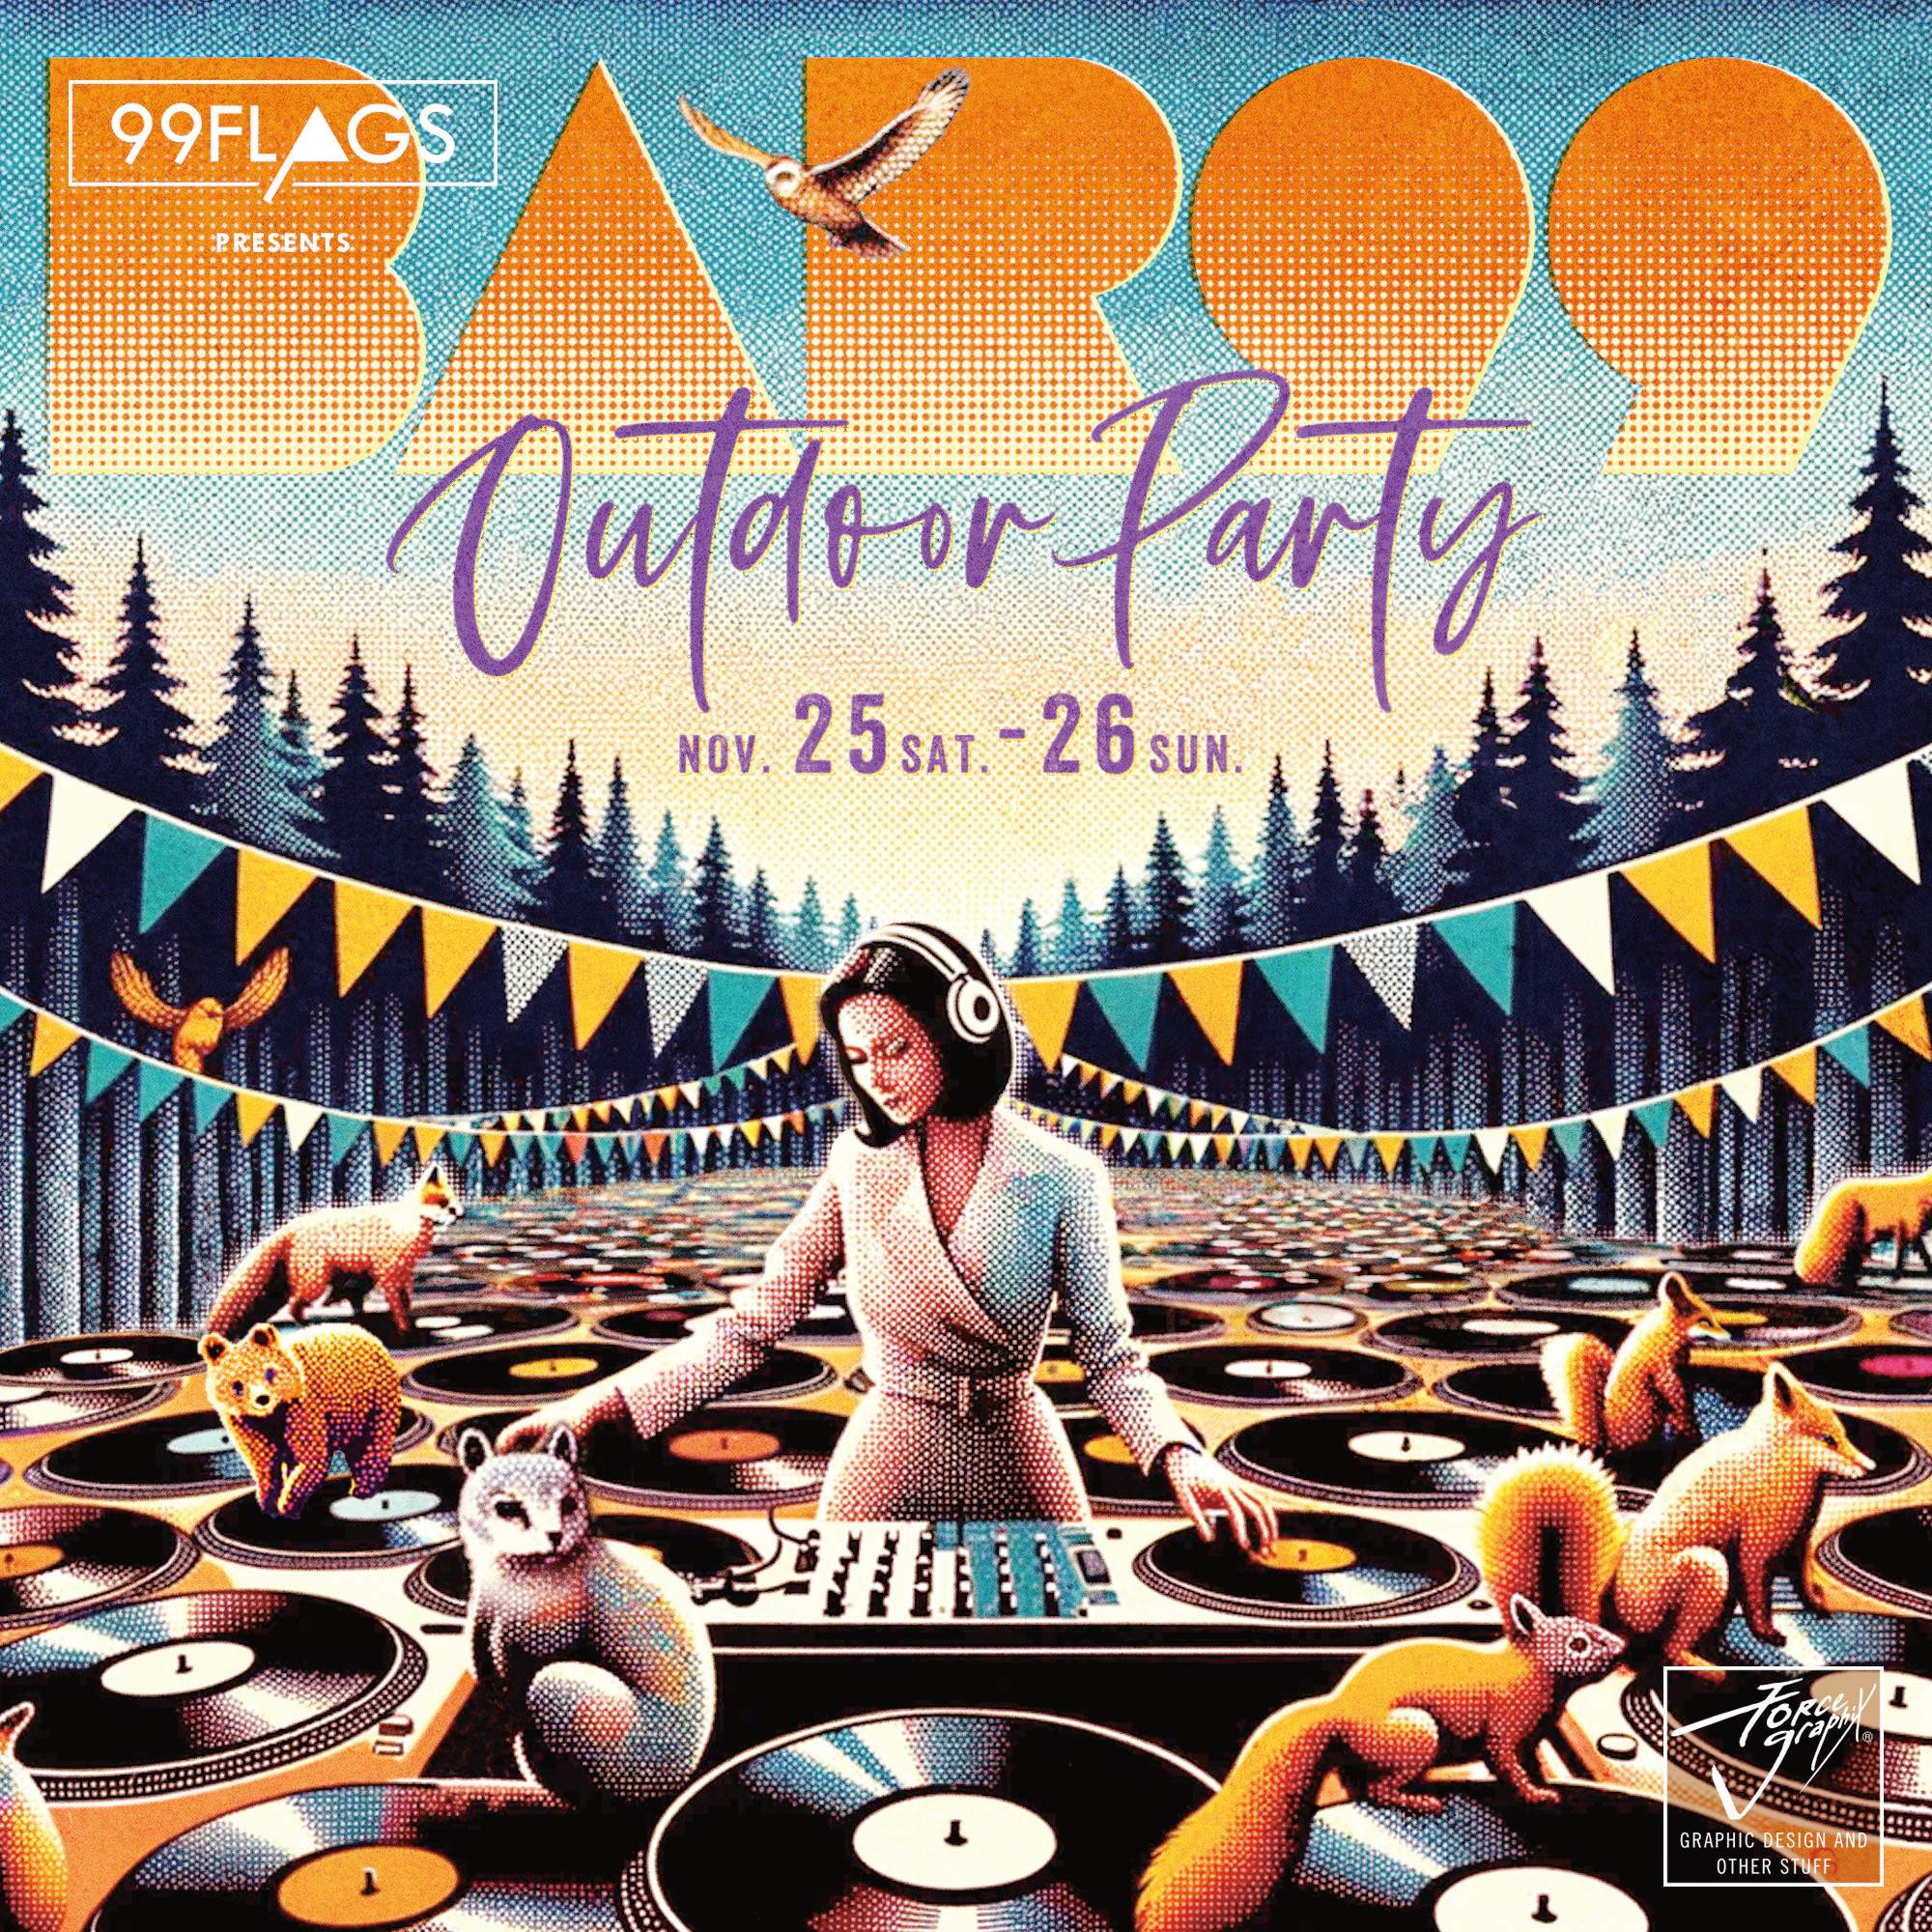 99FLAGS PRESENTS 'BAR99' OUTDOOR PARTY - フライヤー表